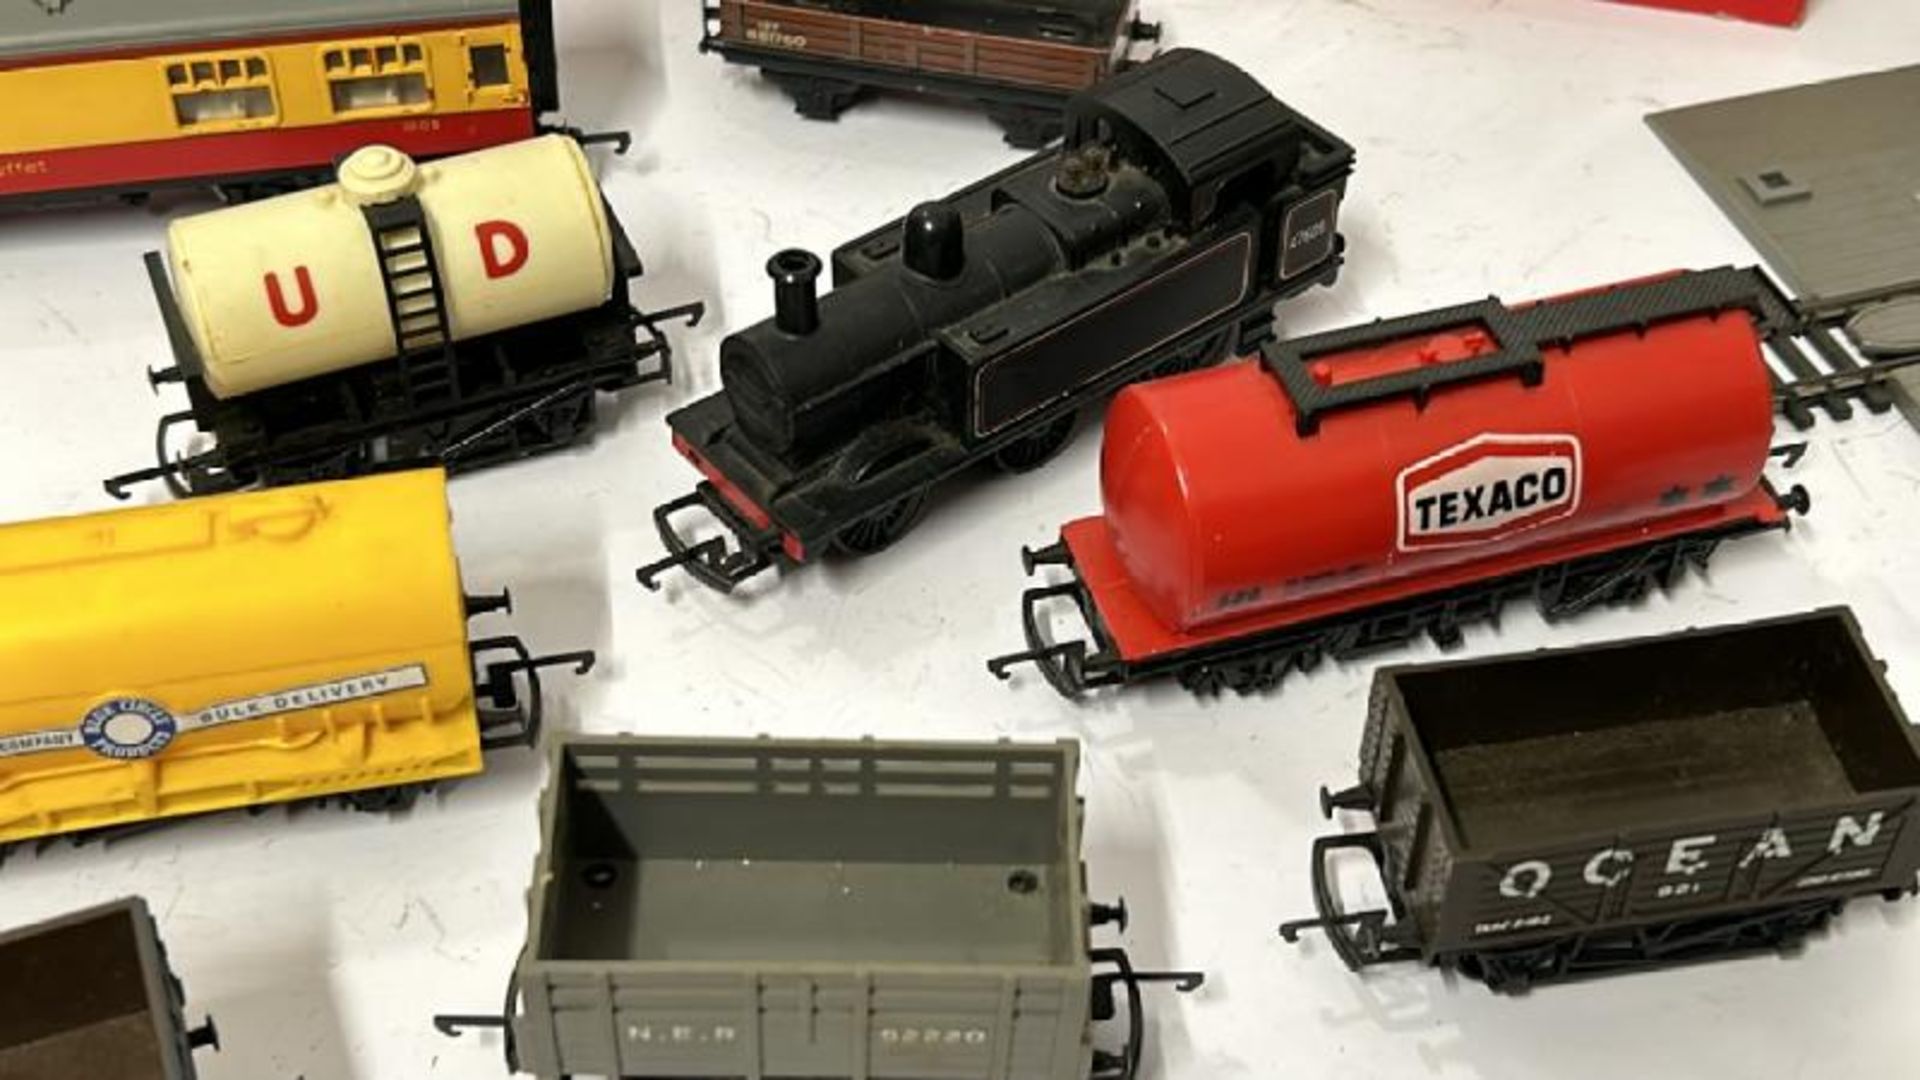 Collection of model trains, track and accessories including Hornby diesel engine D5572, figures, - Image 4 of 10